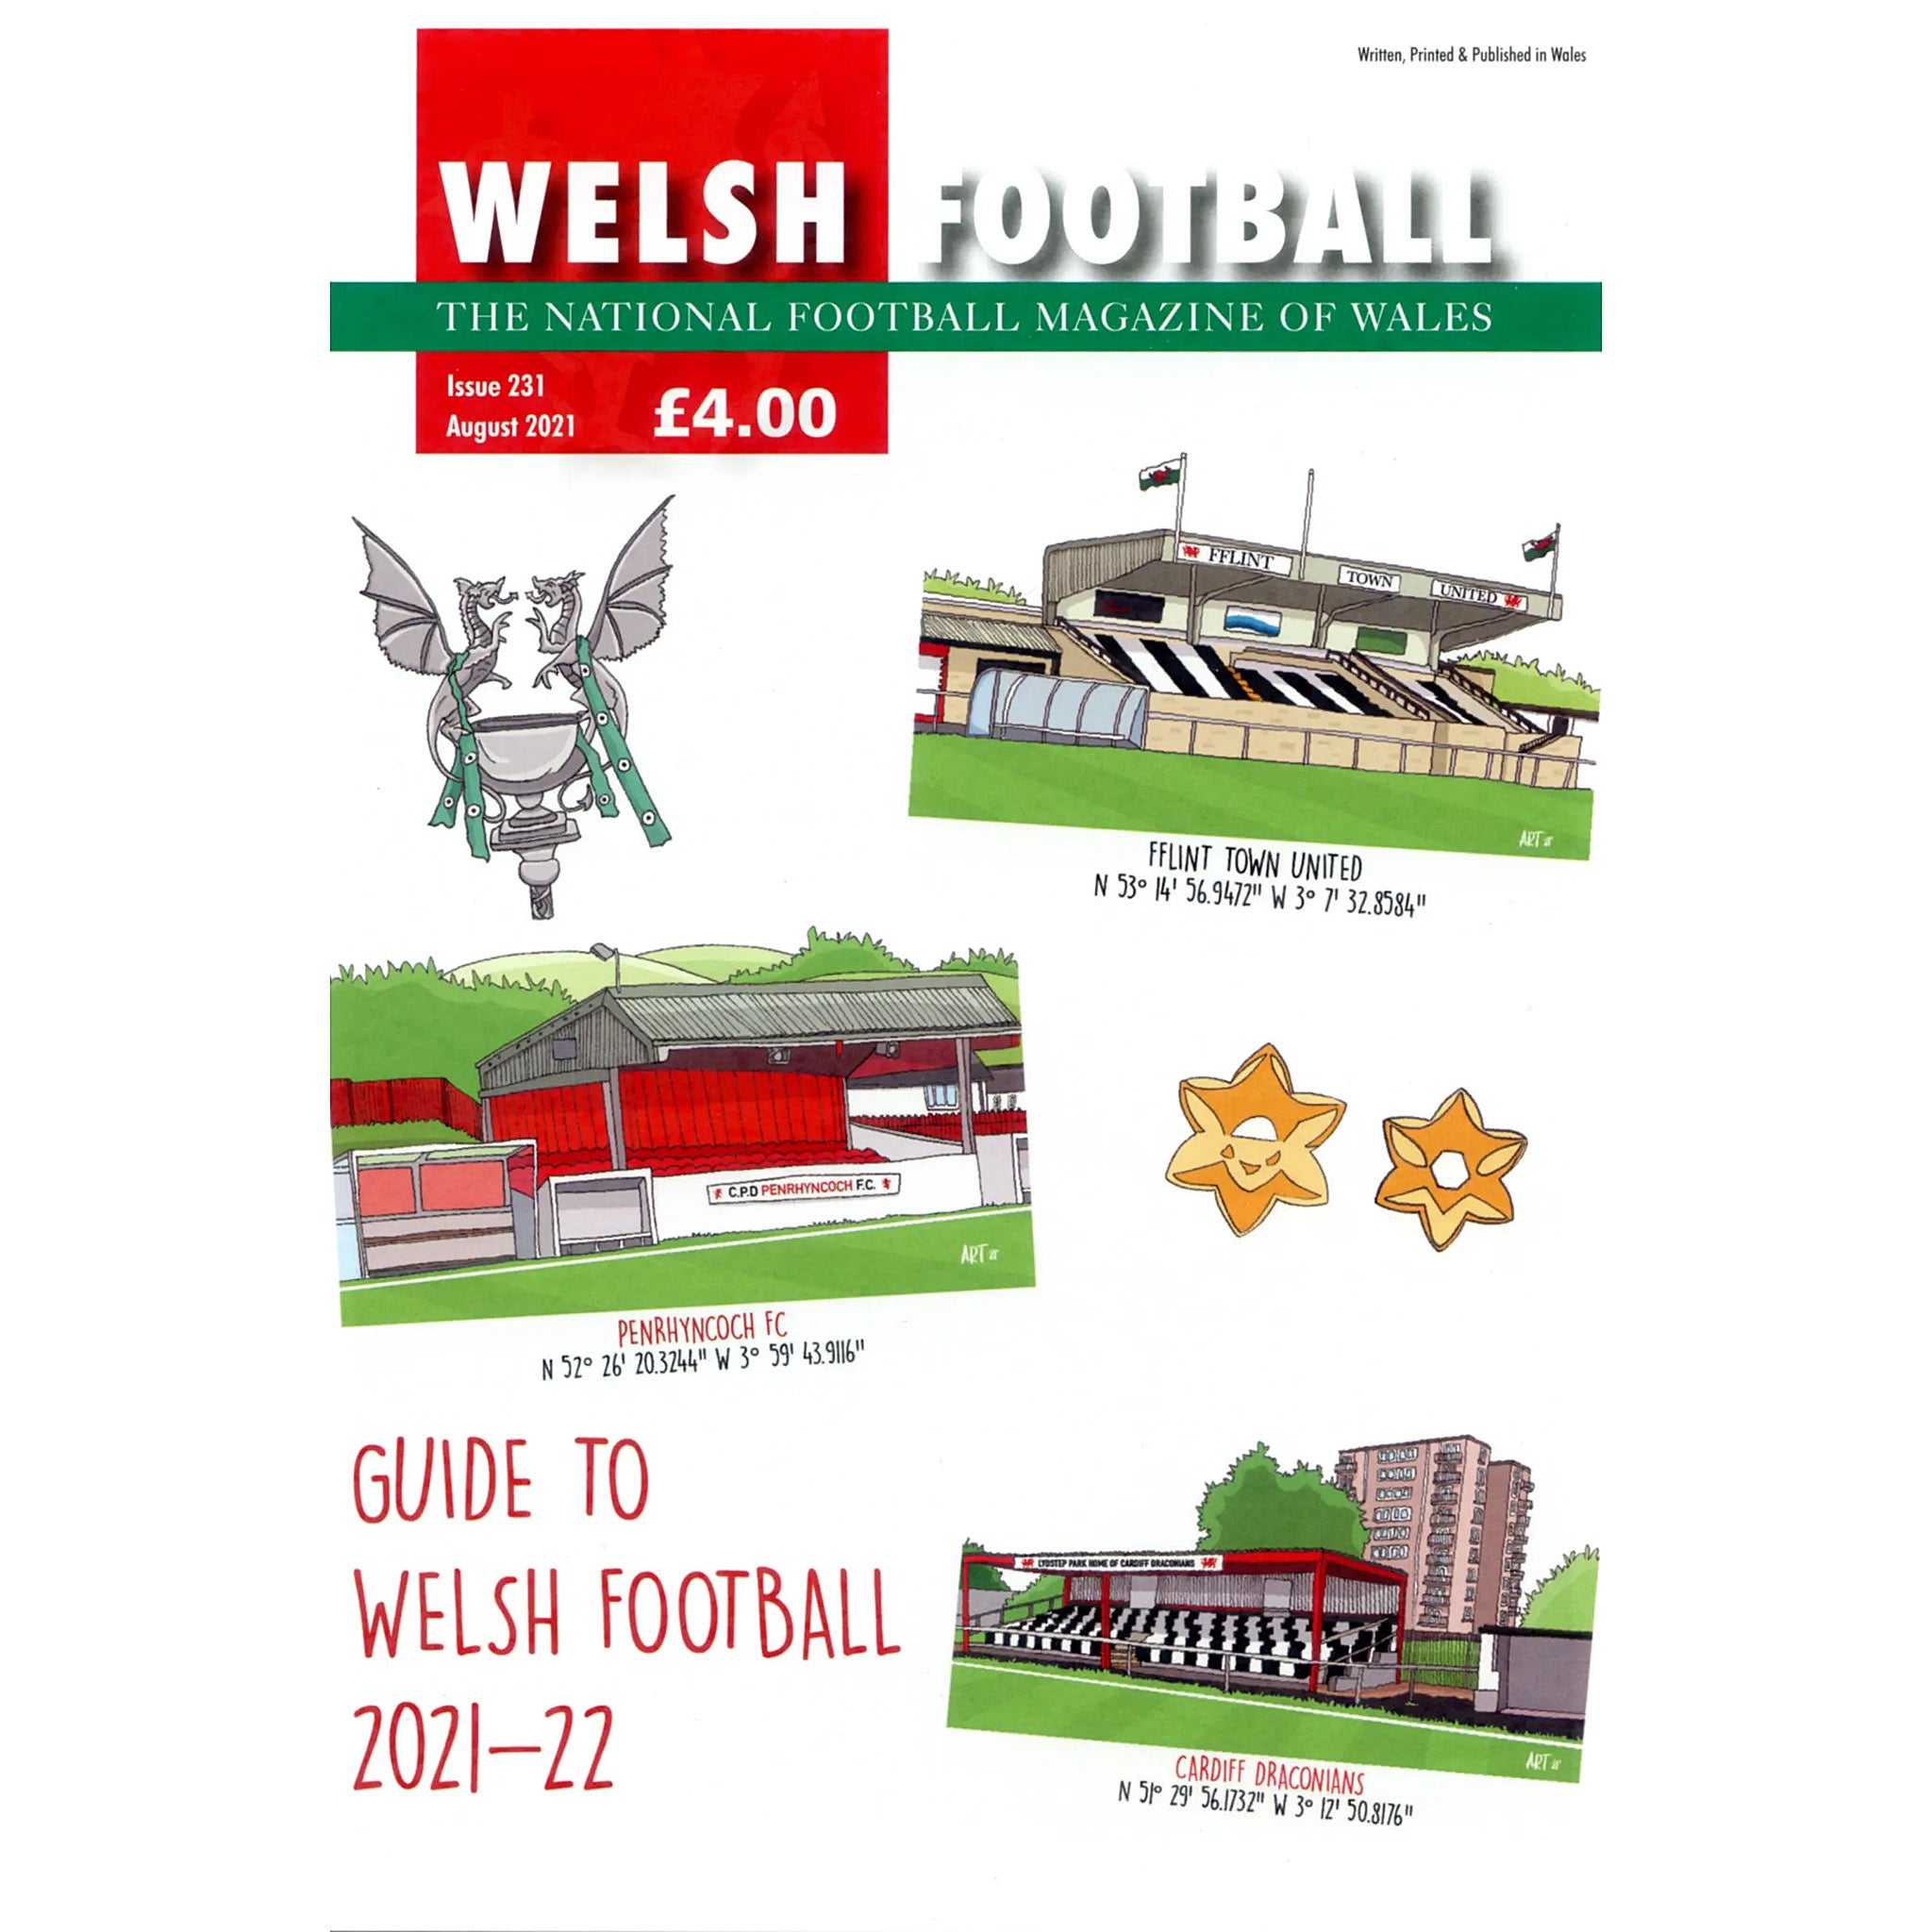 Welsh Football – Guide to Welsh Football 2021-22